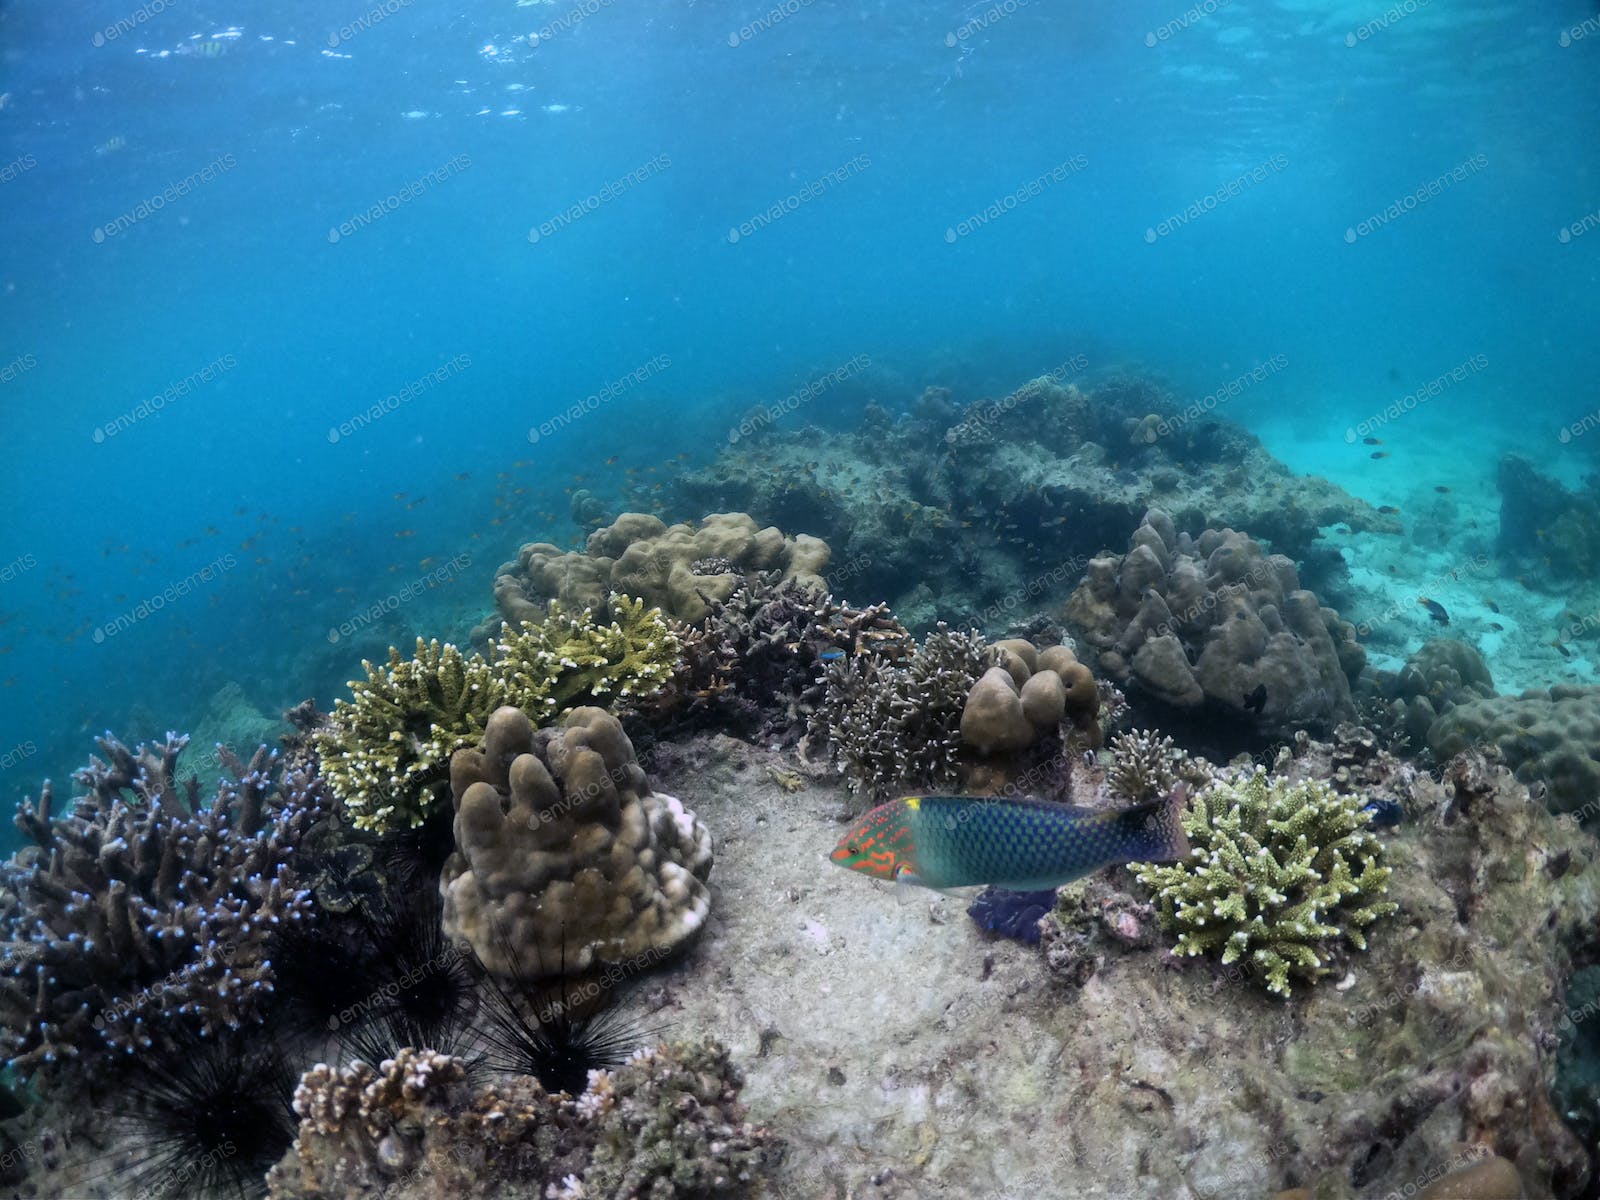 Underwater seascape of corals and algae in the ocean. photo by erika8213 on Envato Elements